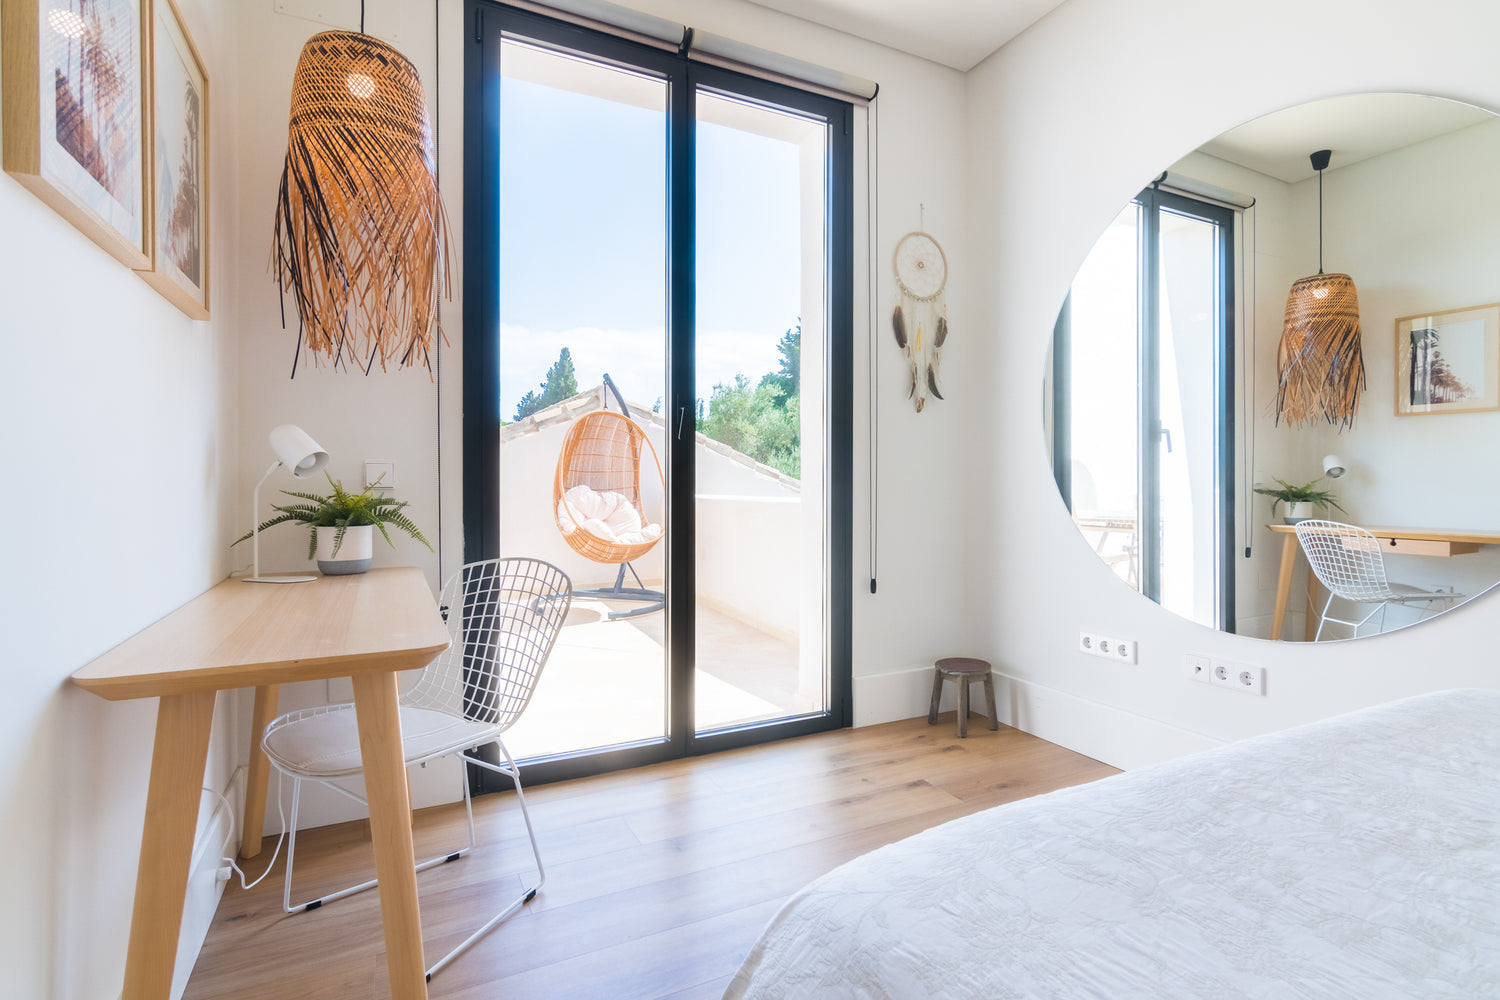 Second bedroom suite of Villa, Marbella luxury Beach House short term rental, located on the beach side at Marbella´s exclusive Golden Mile just steps from the sea 